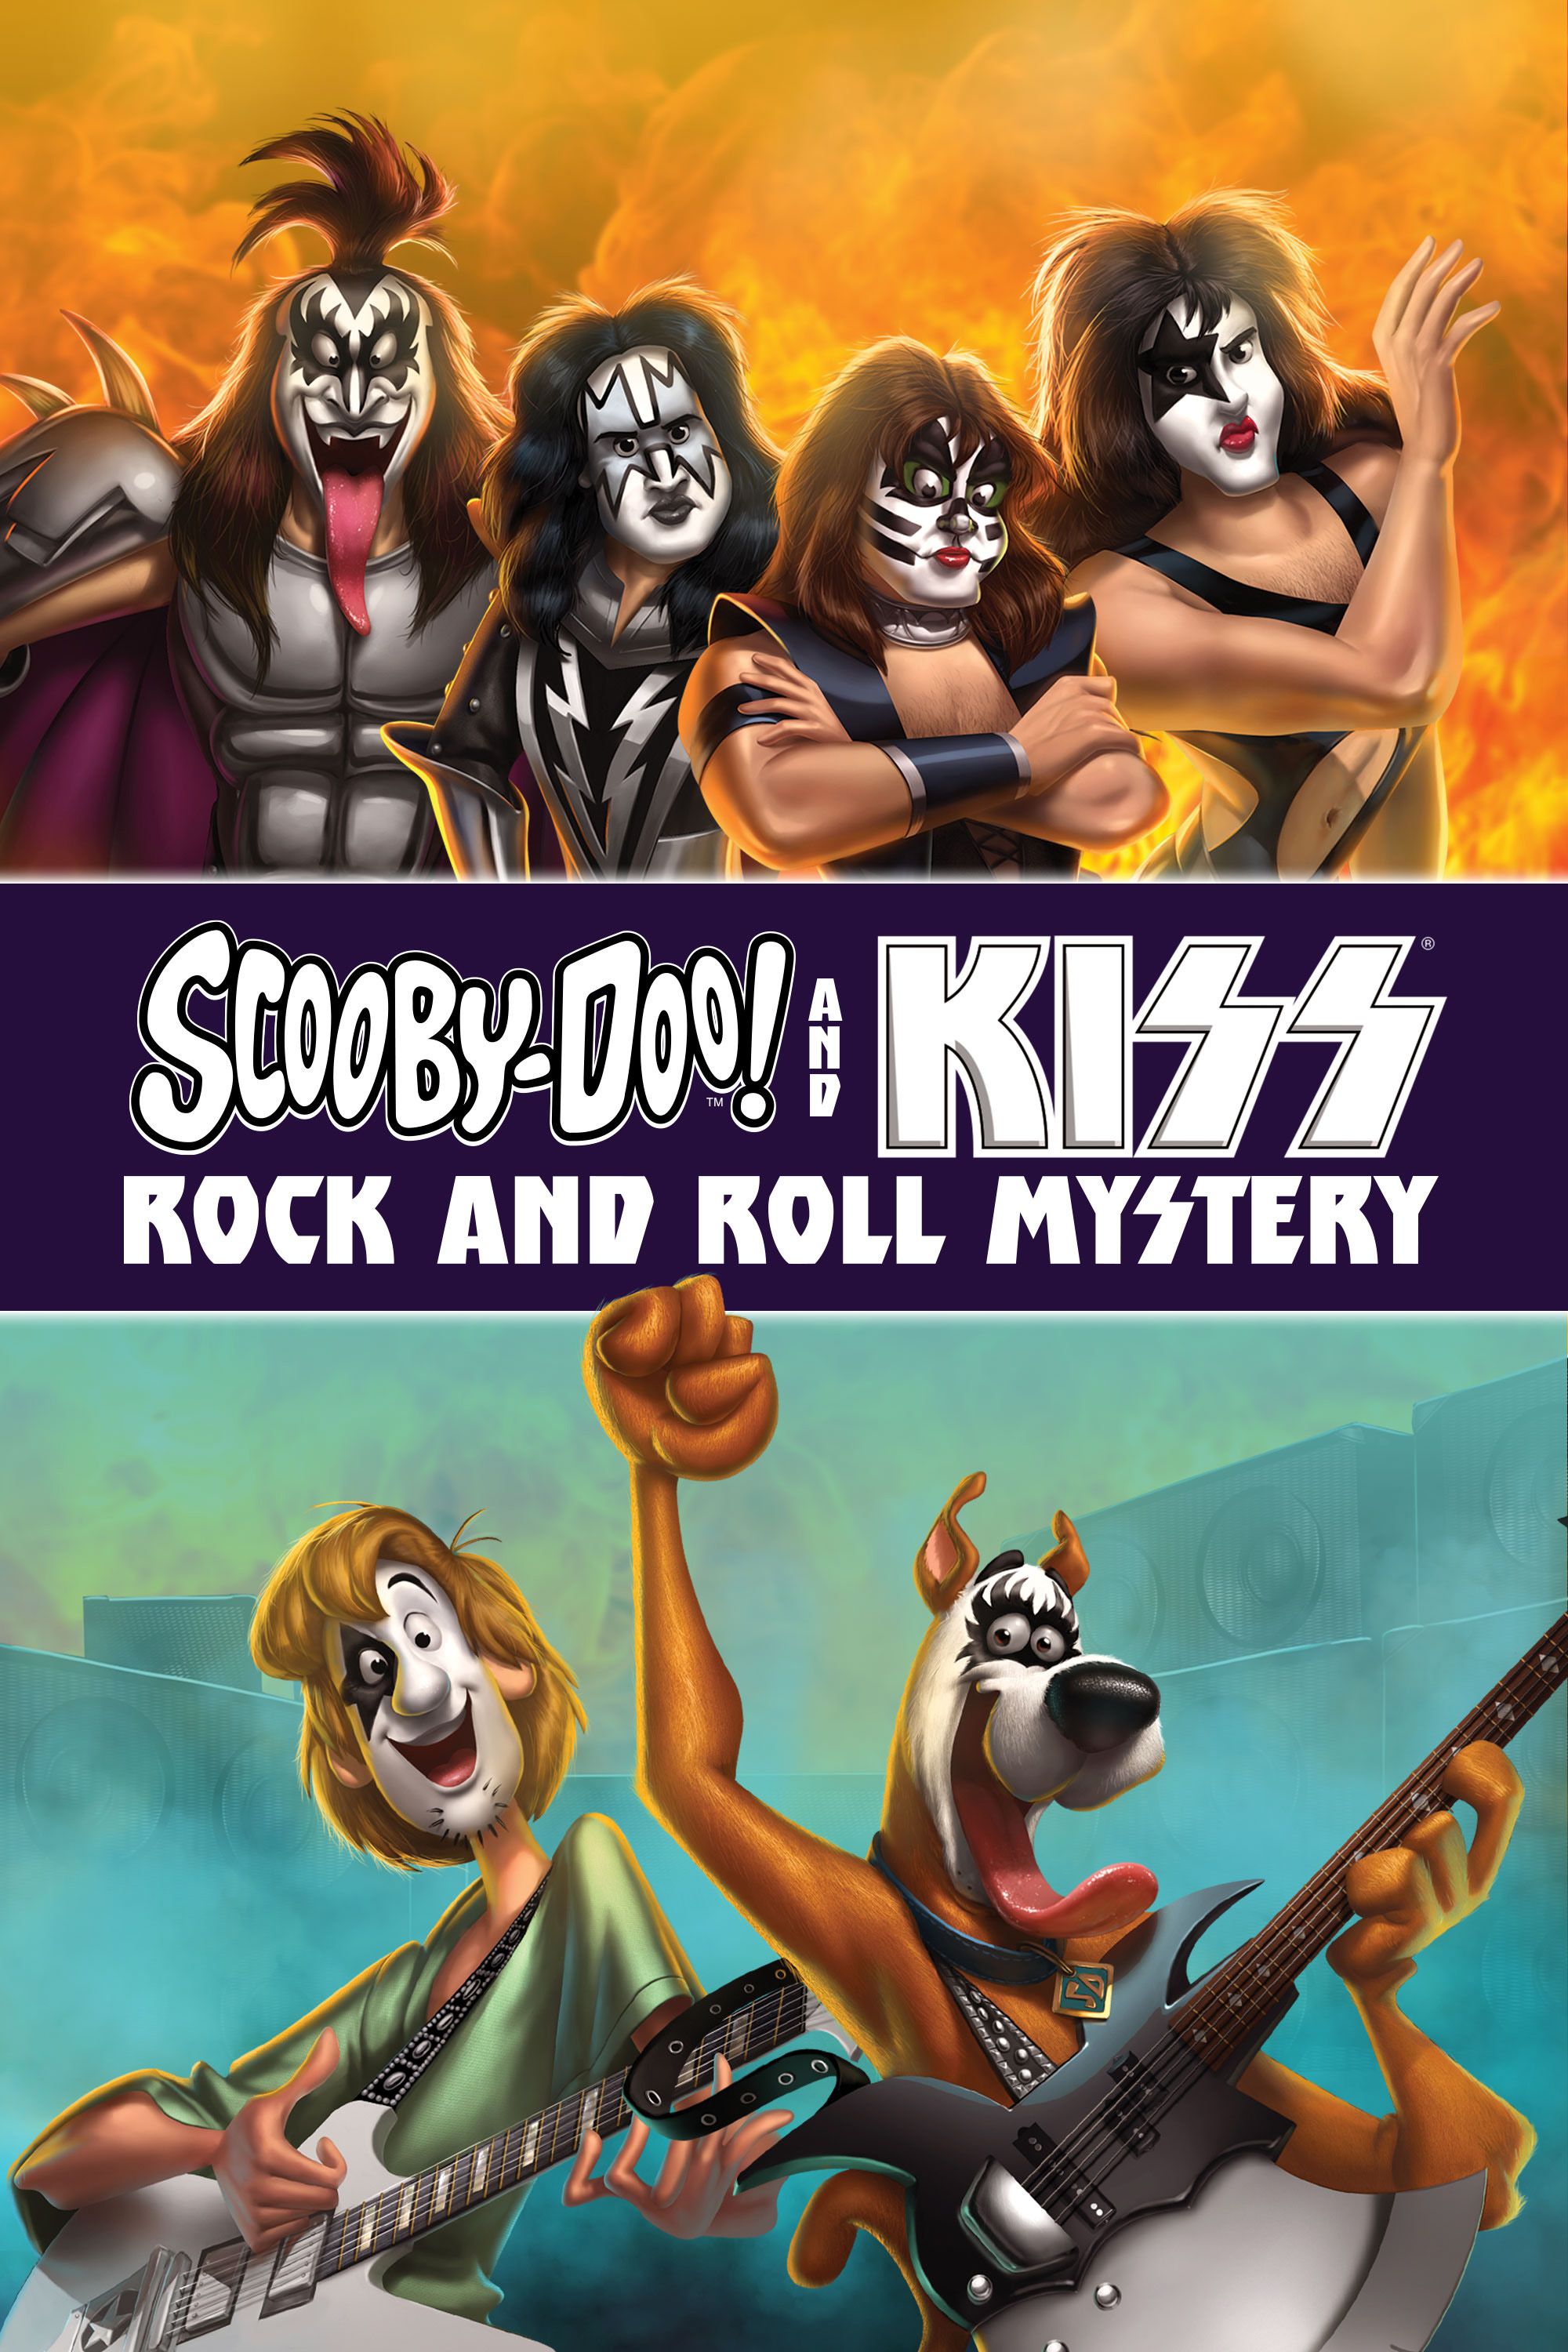 Scooby-Doo! & KISS: Rock & Roll Mystery | Movies Anywhere